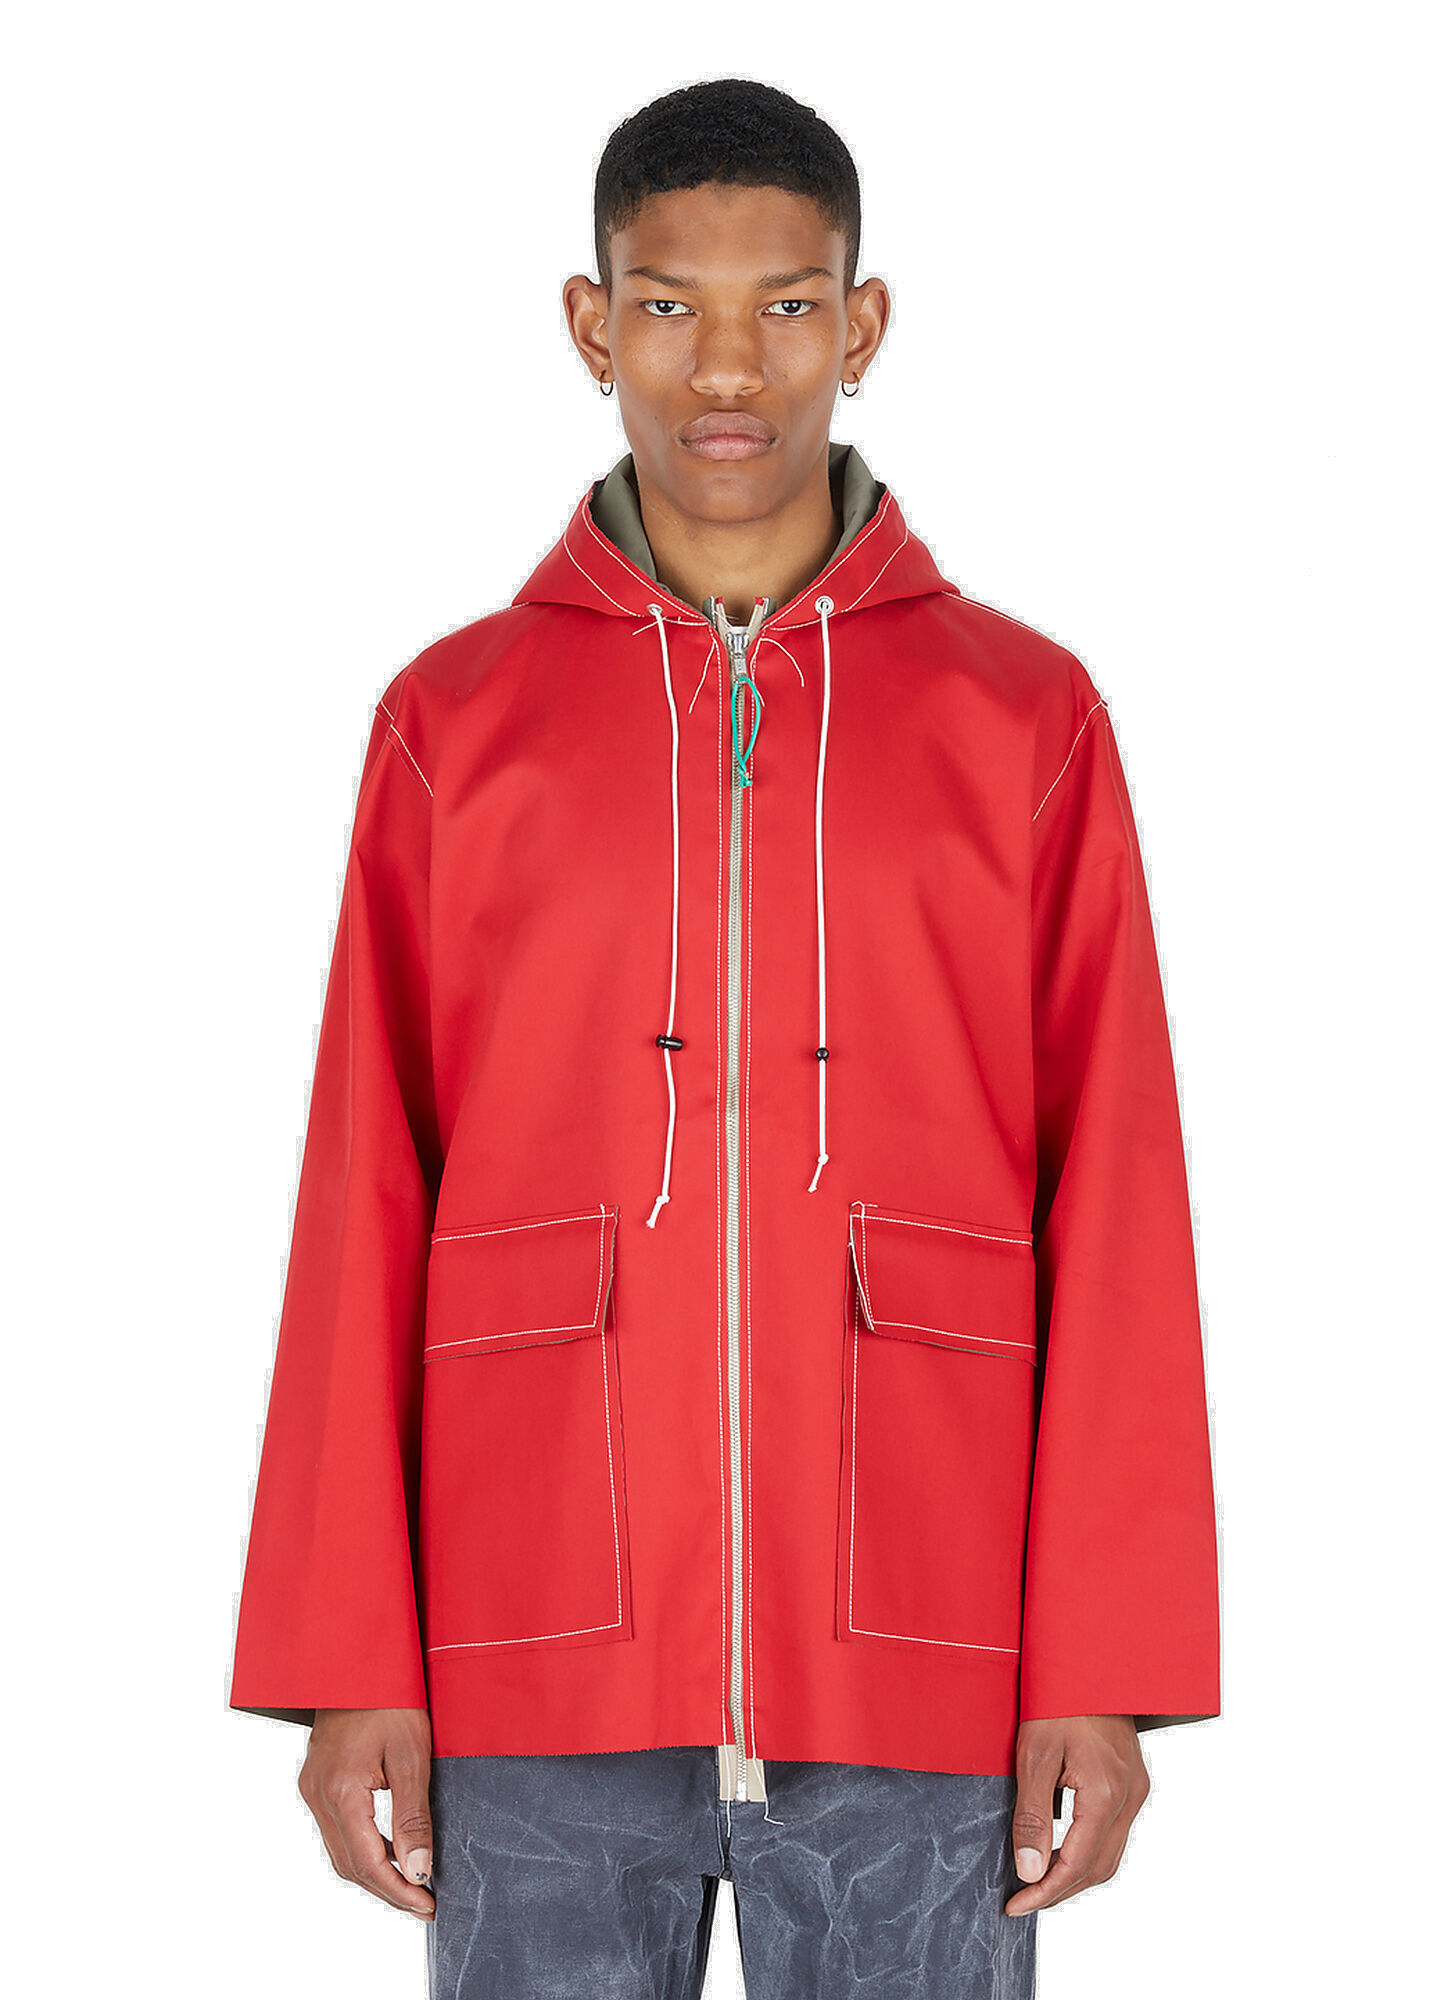 Photo: Hooded Rain Jacket in Red